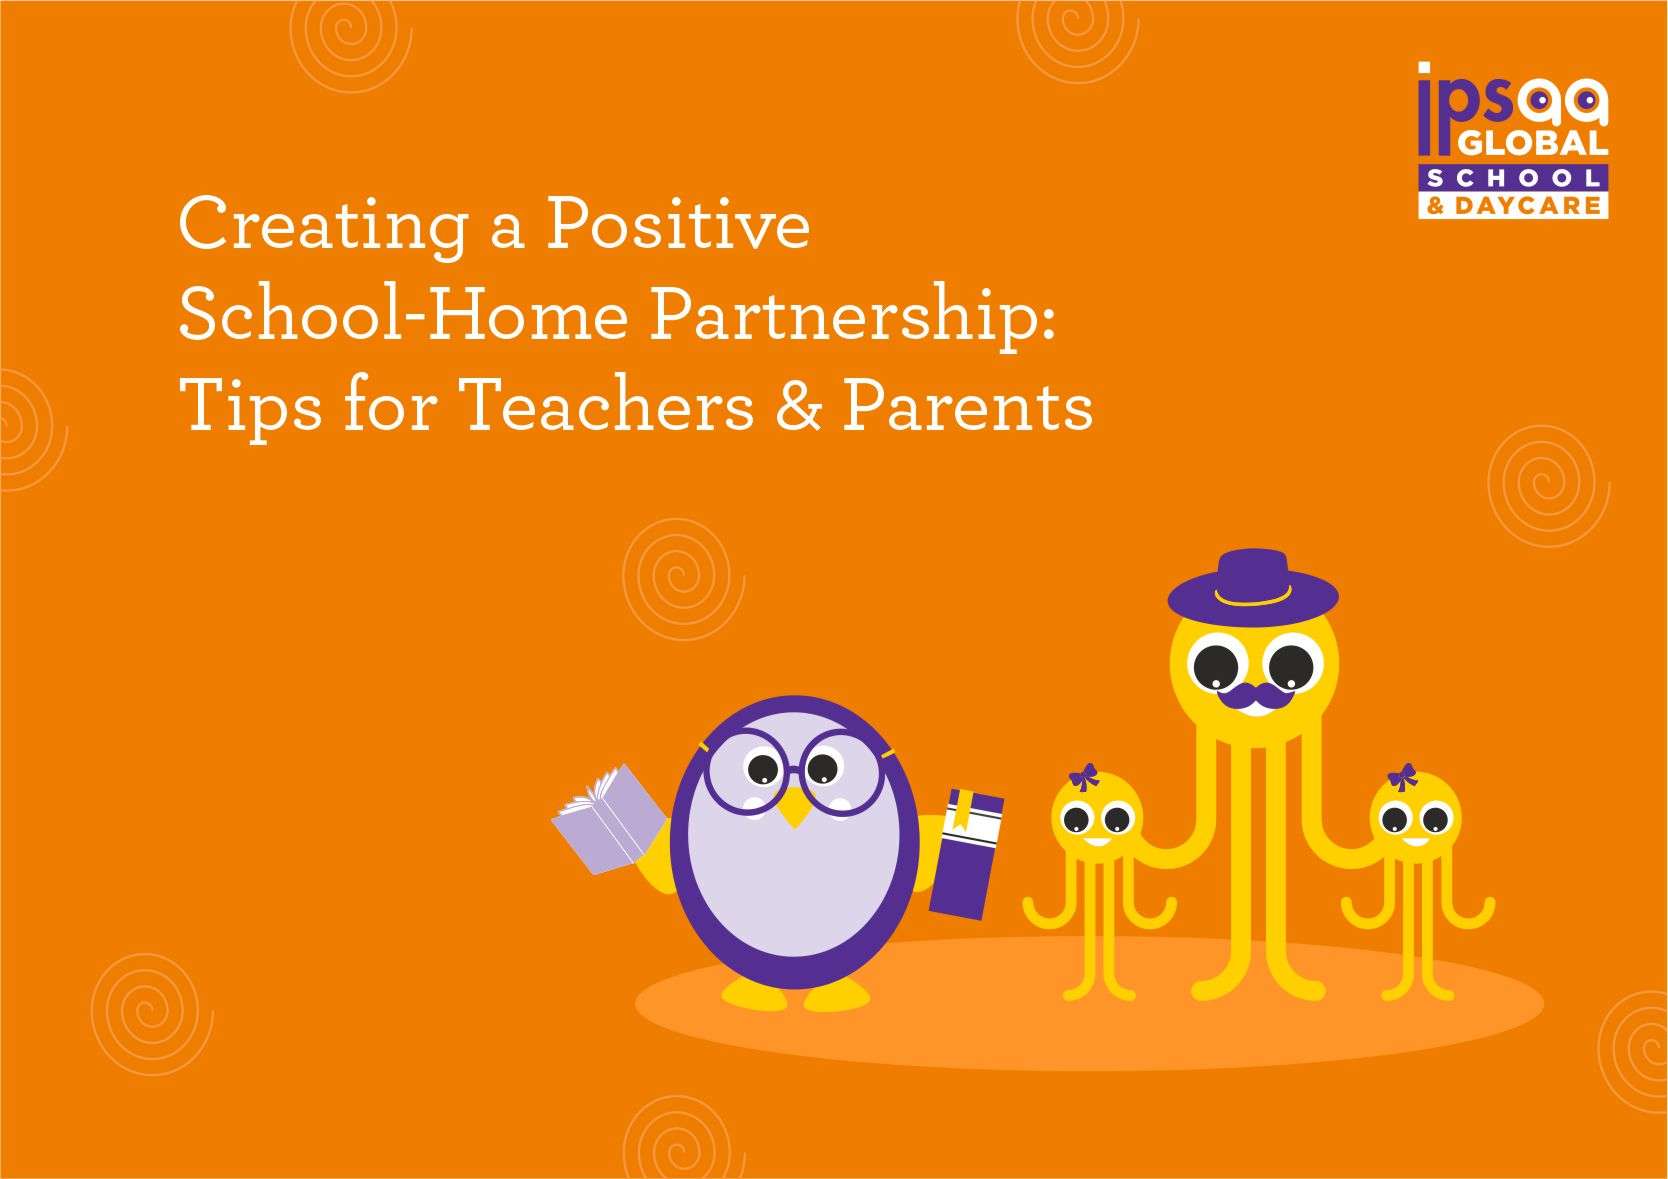 Creating a Positive School-Home Partnership: Tips for Teachers and Parents